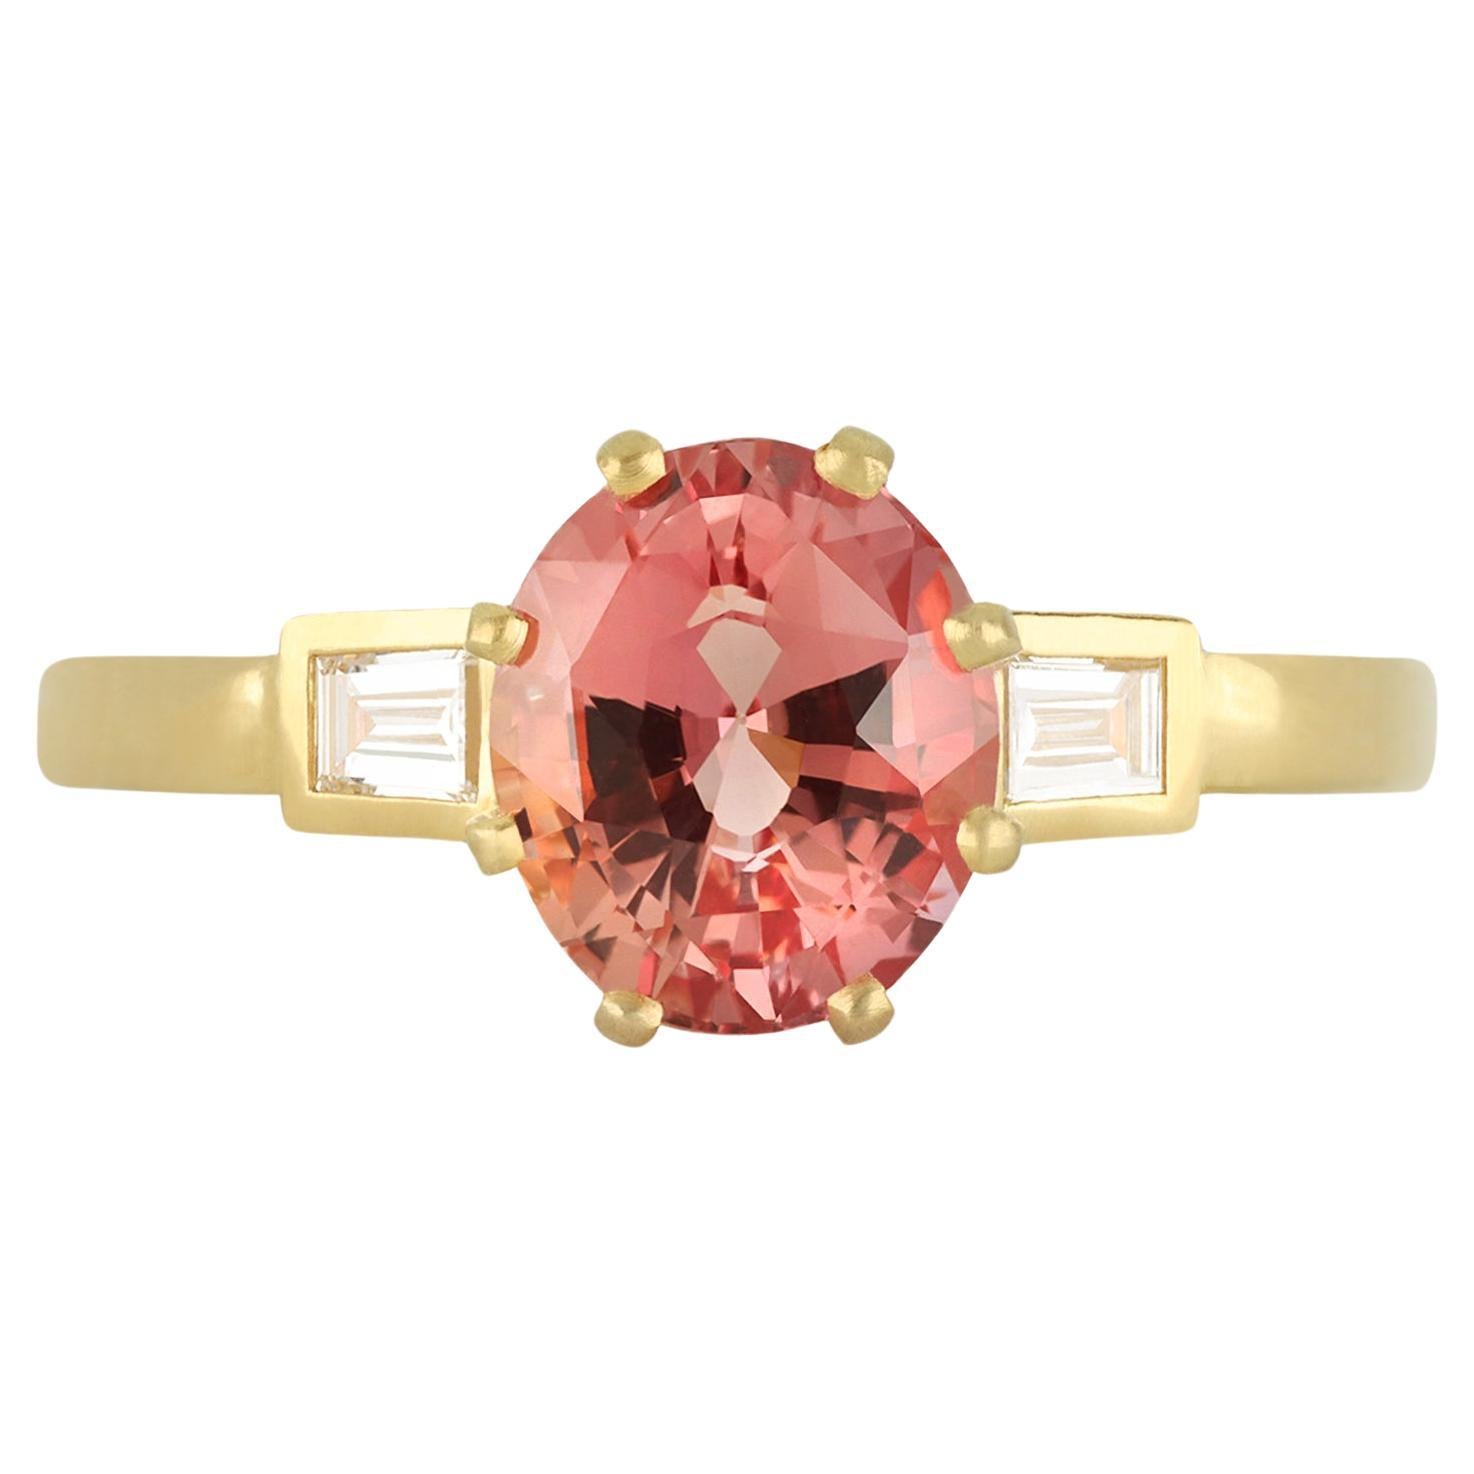 Padparadscha sapphire and diamond flanked solitaire ring, circa 1990.